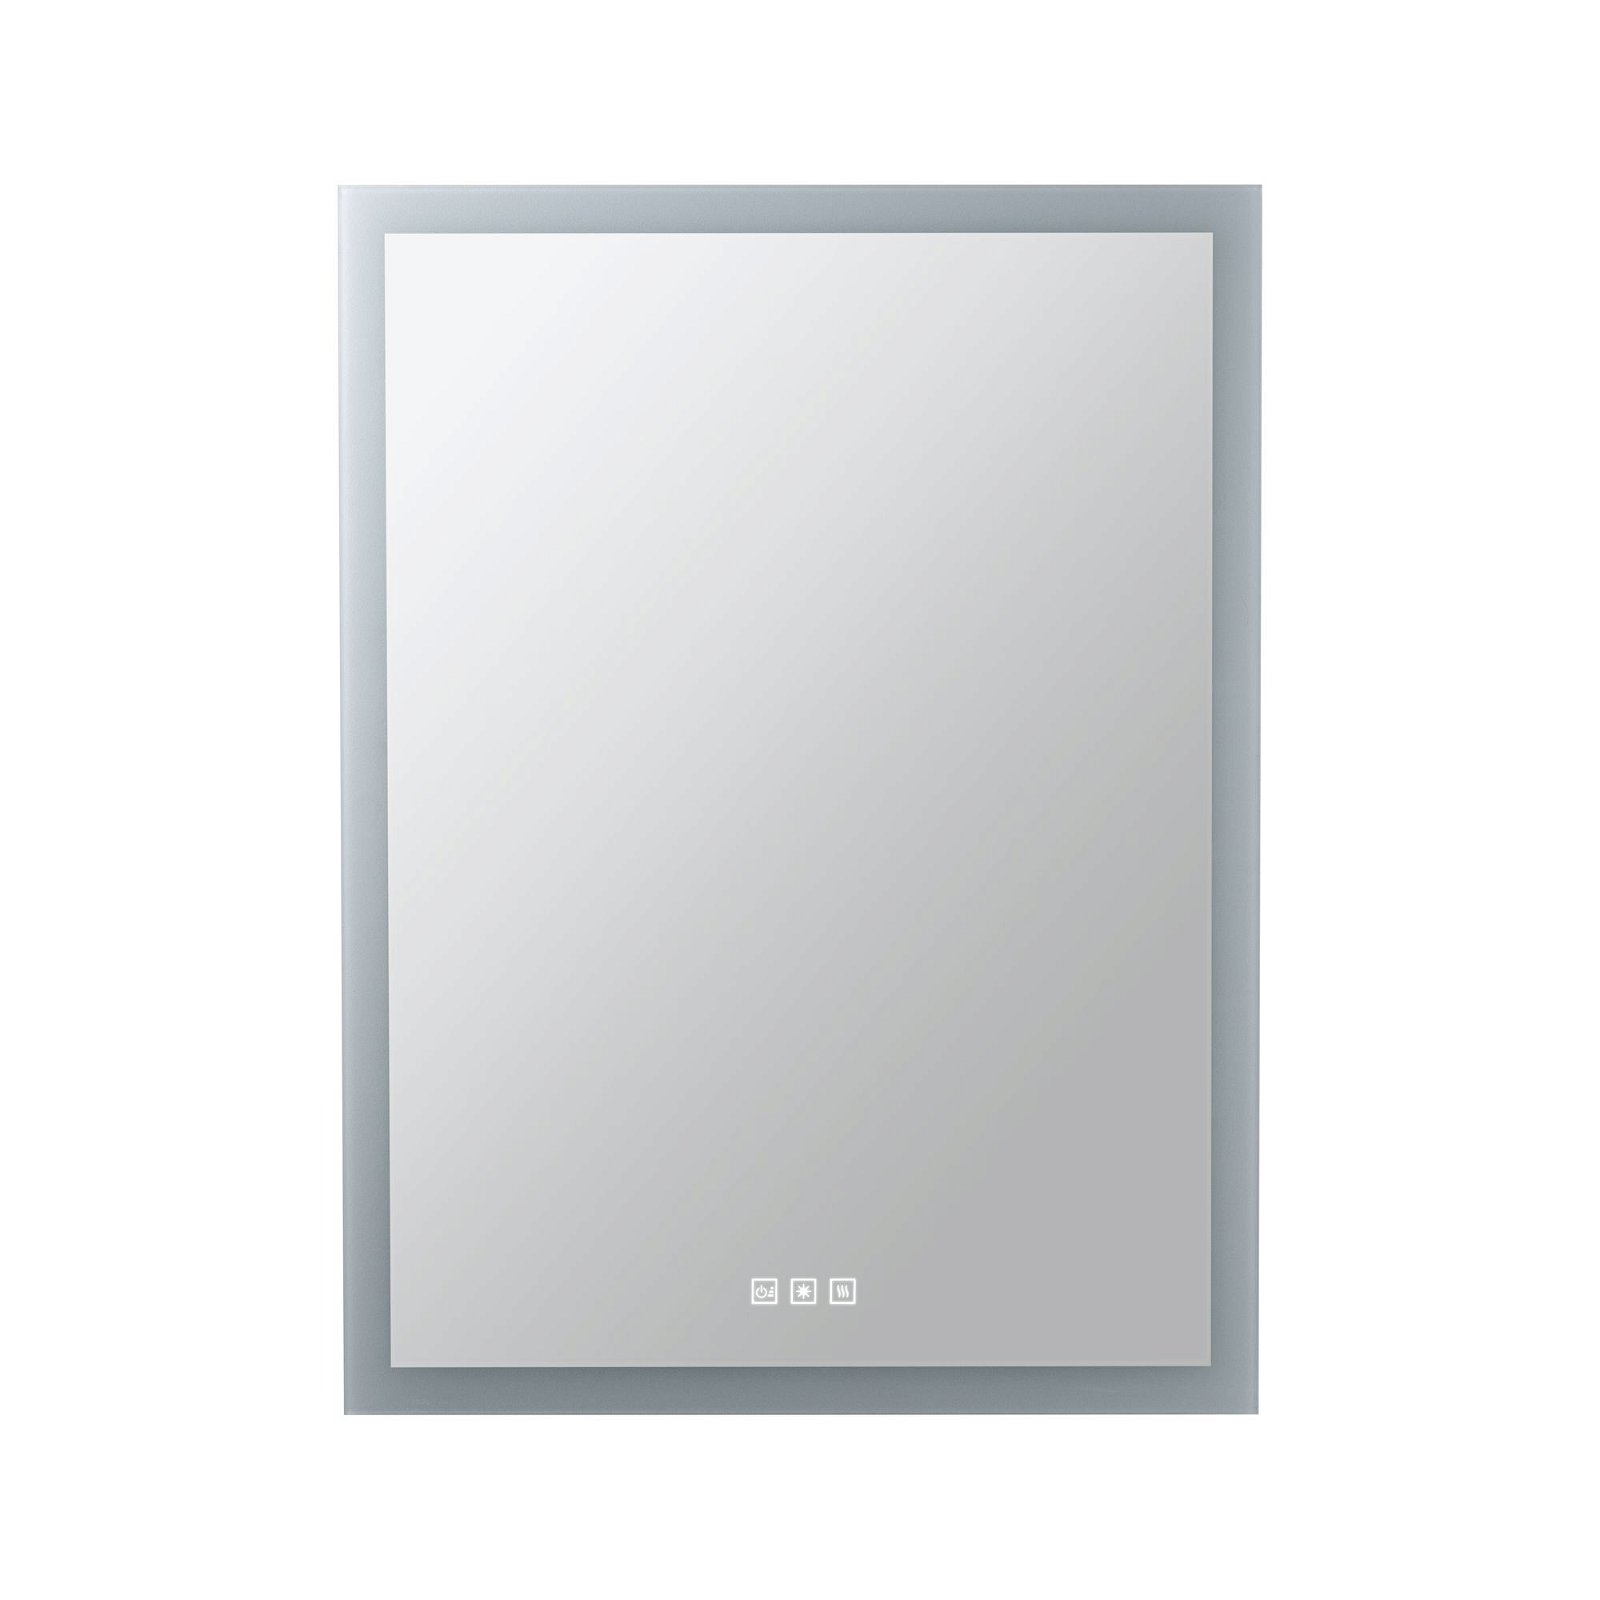 LED Illuminated mirror Mirra IP44 White Switch 1600lm 230V 22W dimmable Mirror/White